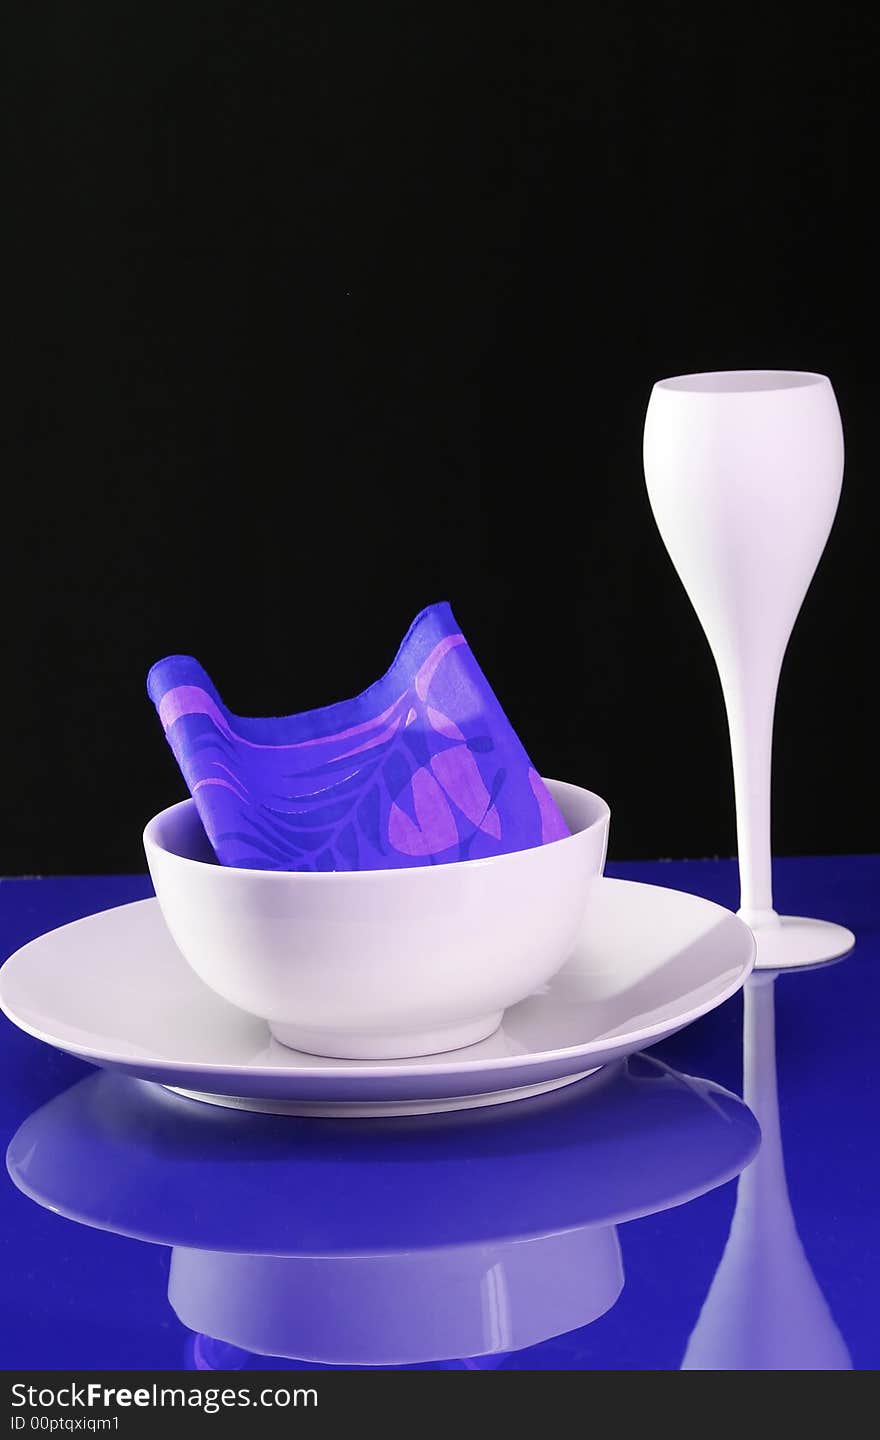 A modern table setting with plate and wine glass in blue and white. A modern table setting with plate and wine glass in blue and white